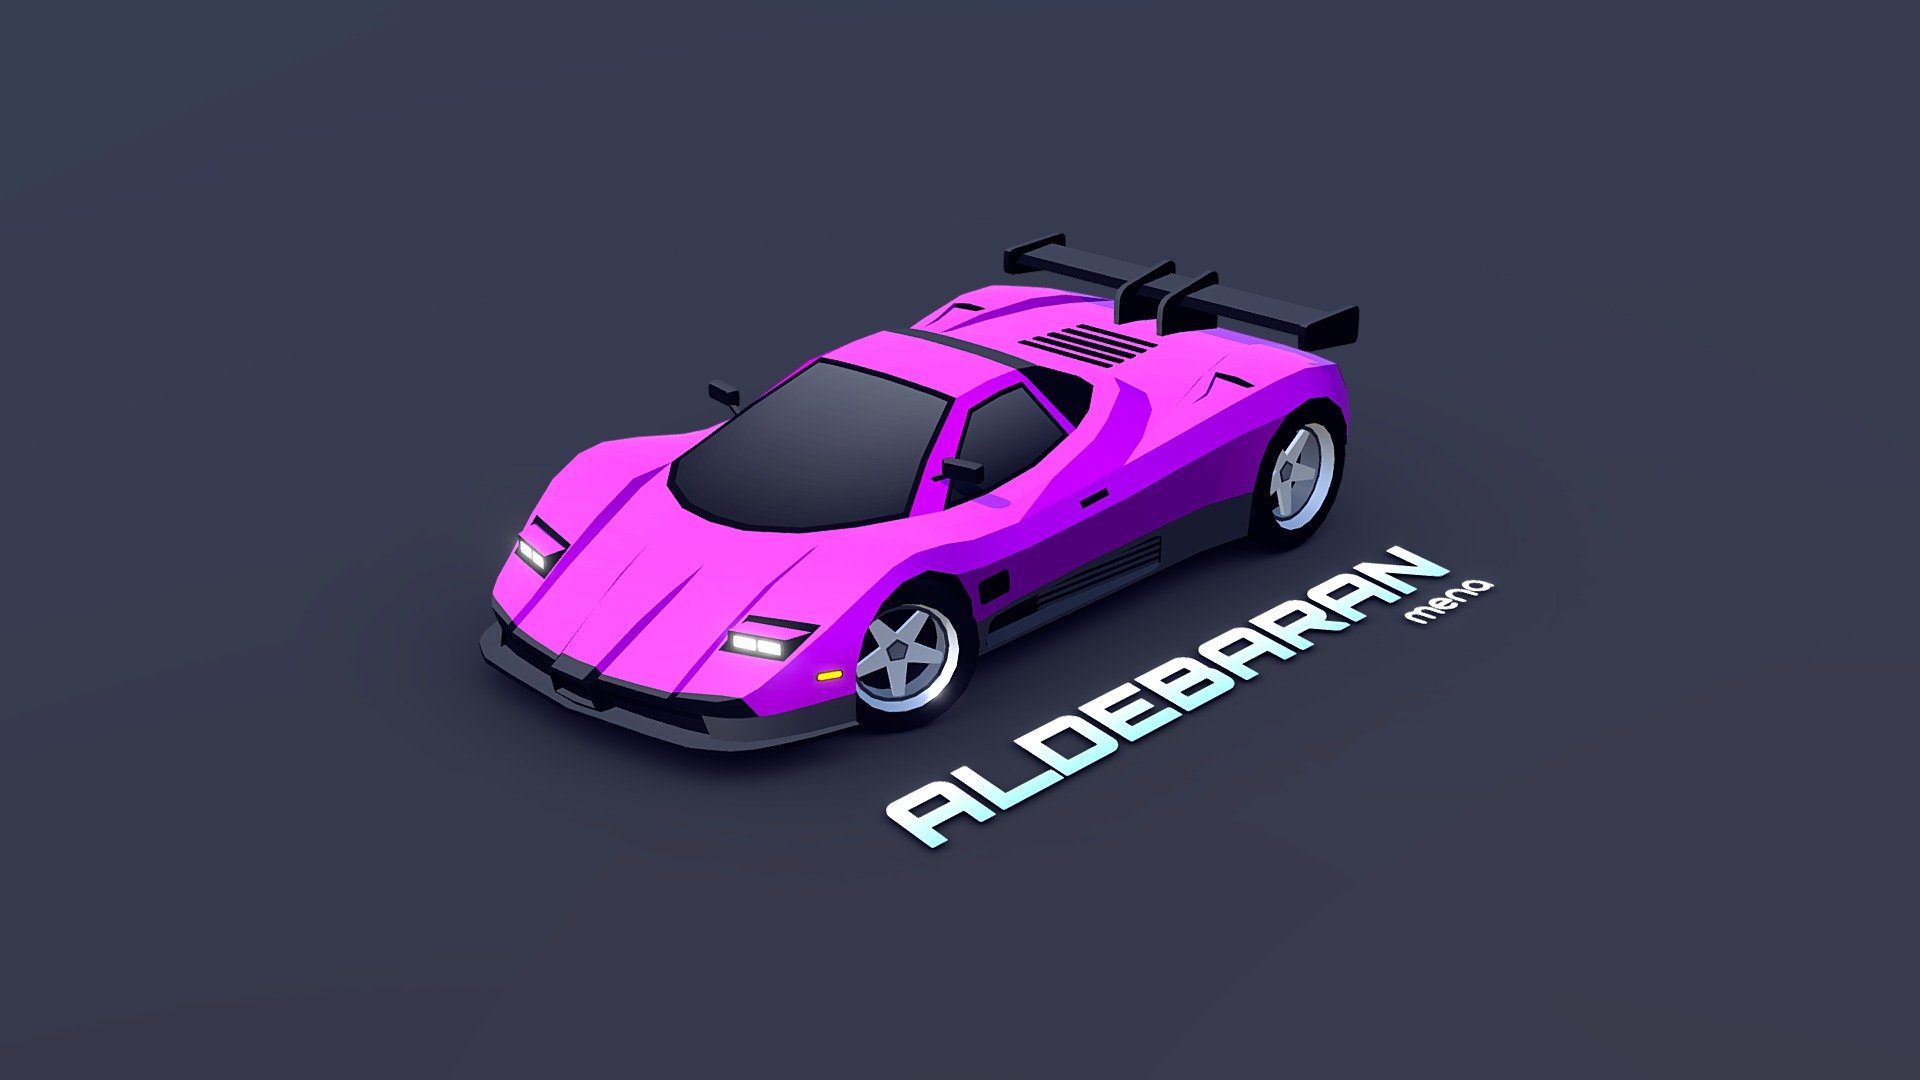 3 new cars are going to be added to ARCADE: Retro Super Cars, and &ldquo;Aldebaran